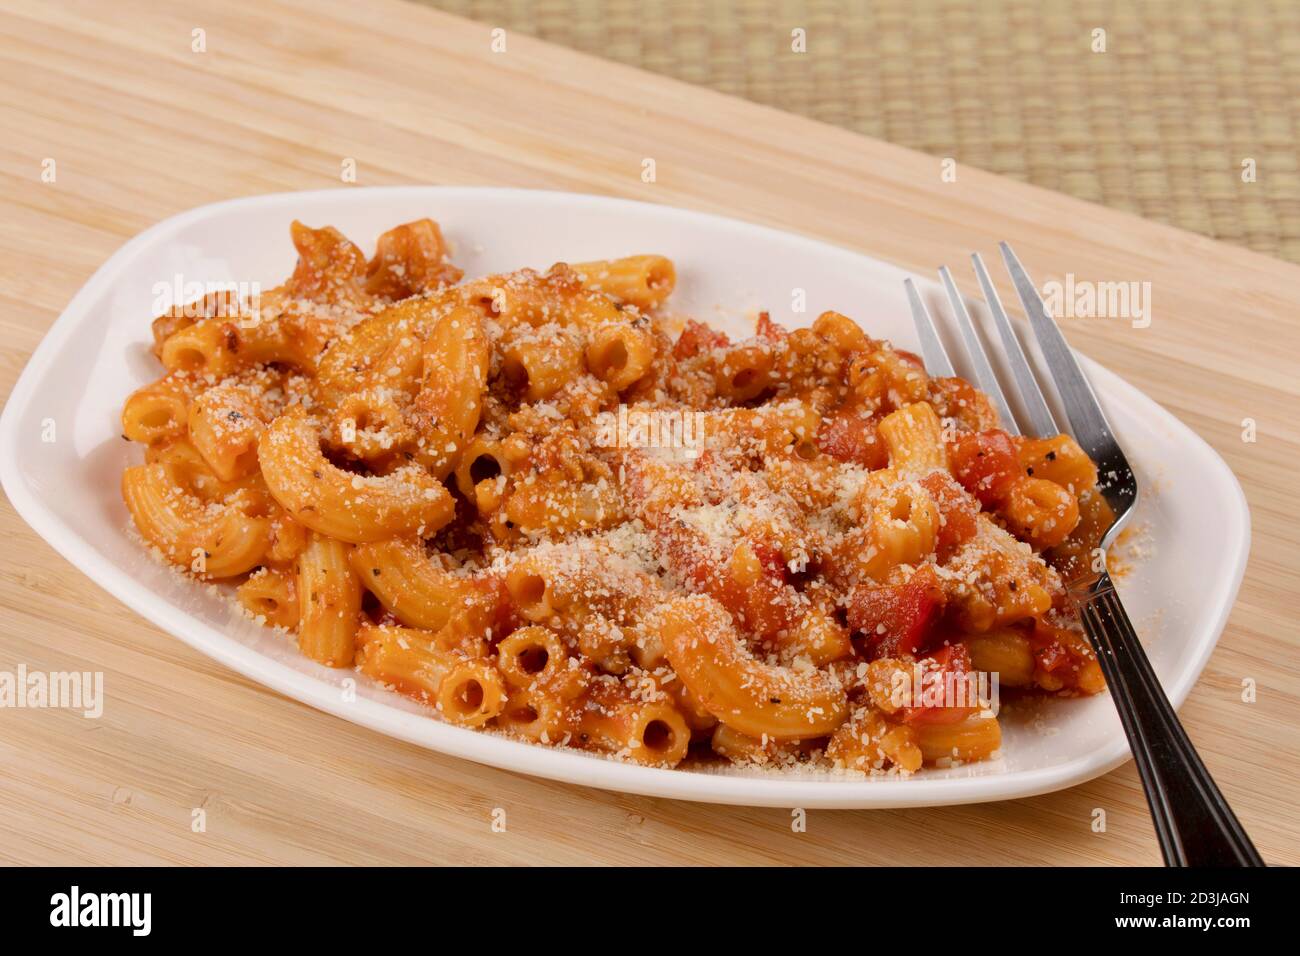 A delicious meal of elbow macaroni with pasta sauce and parmesan cheese Stock Photo